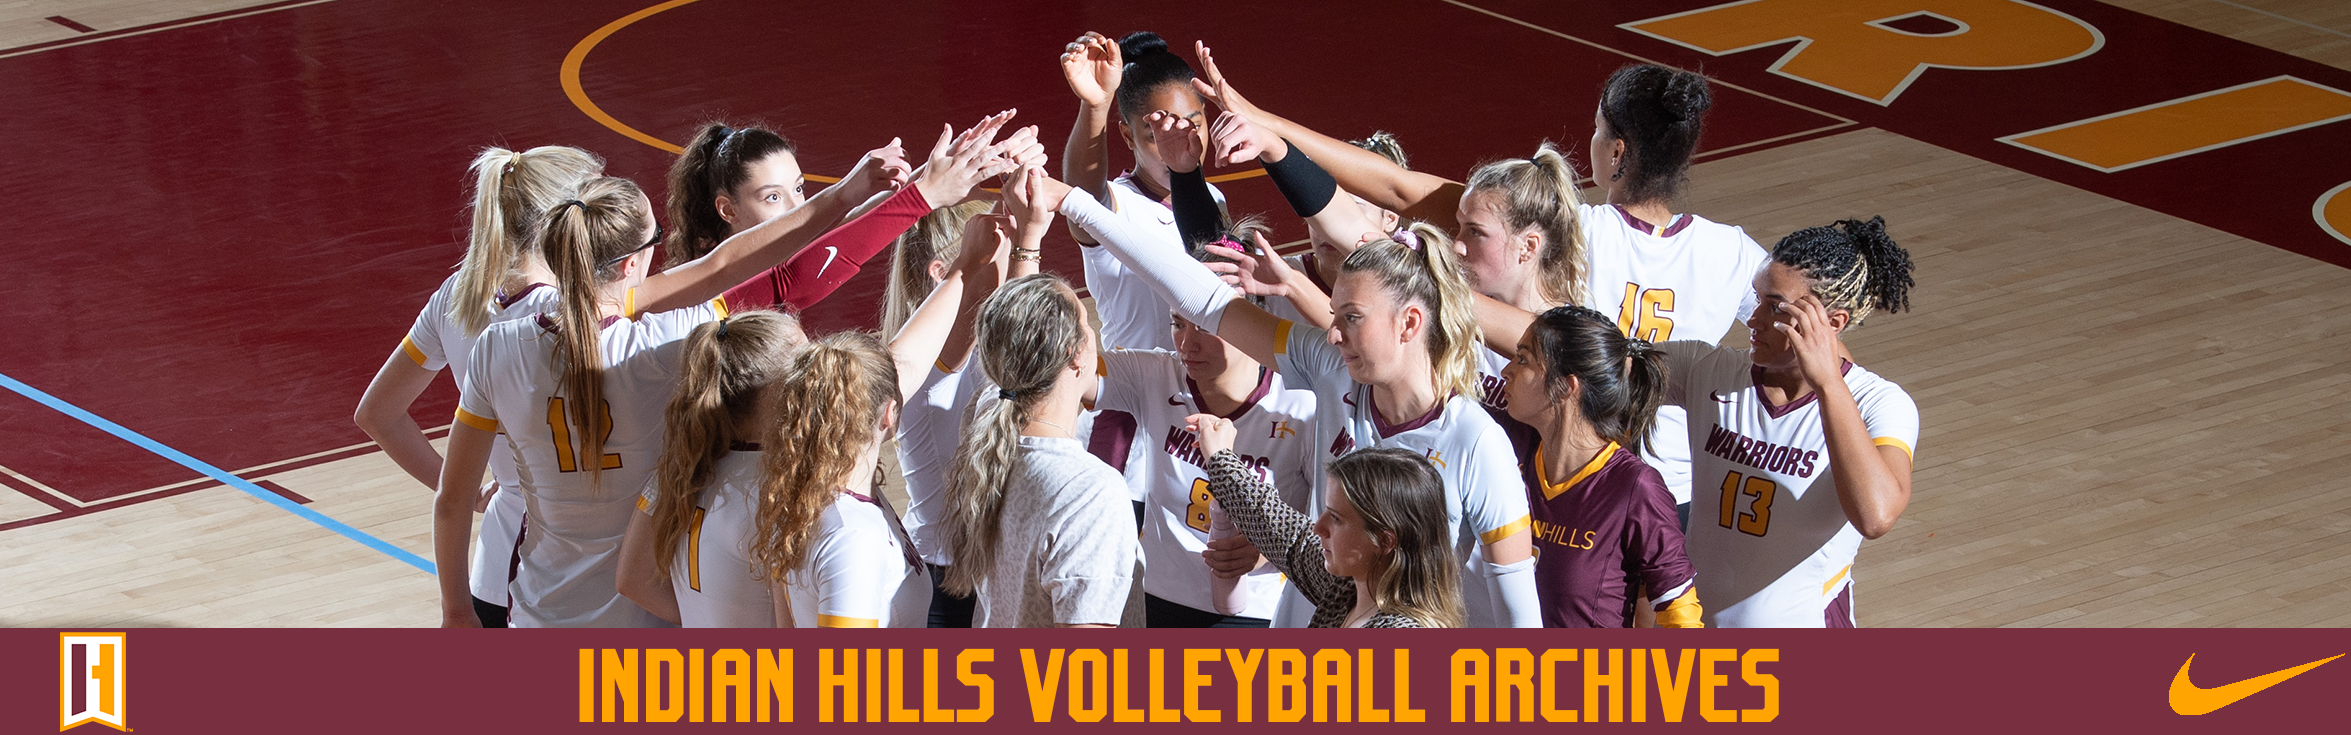 INDIAN HILLS VOLLEYBALL ARCHIVES